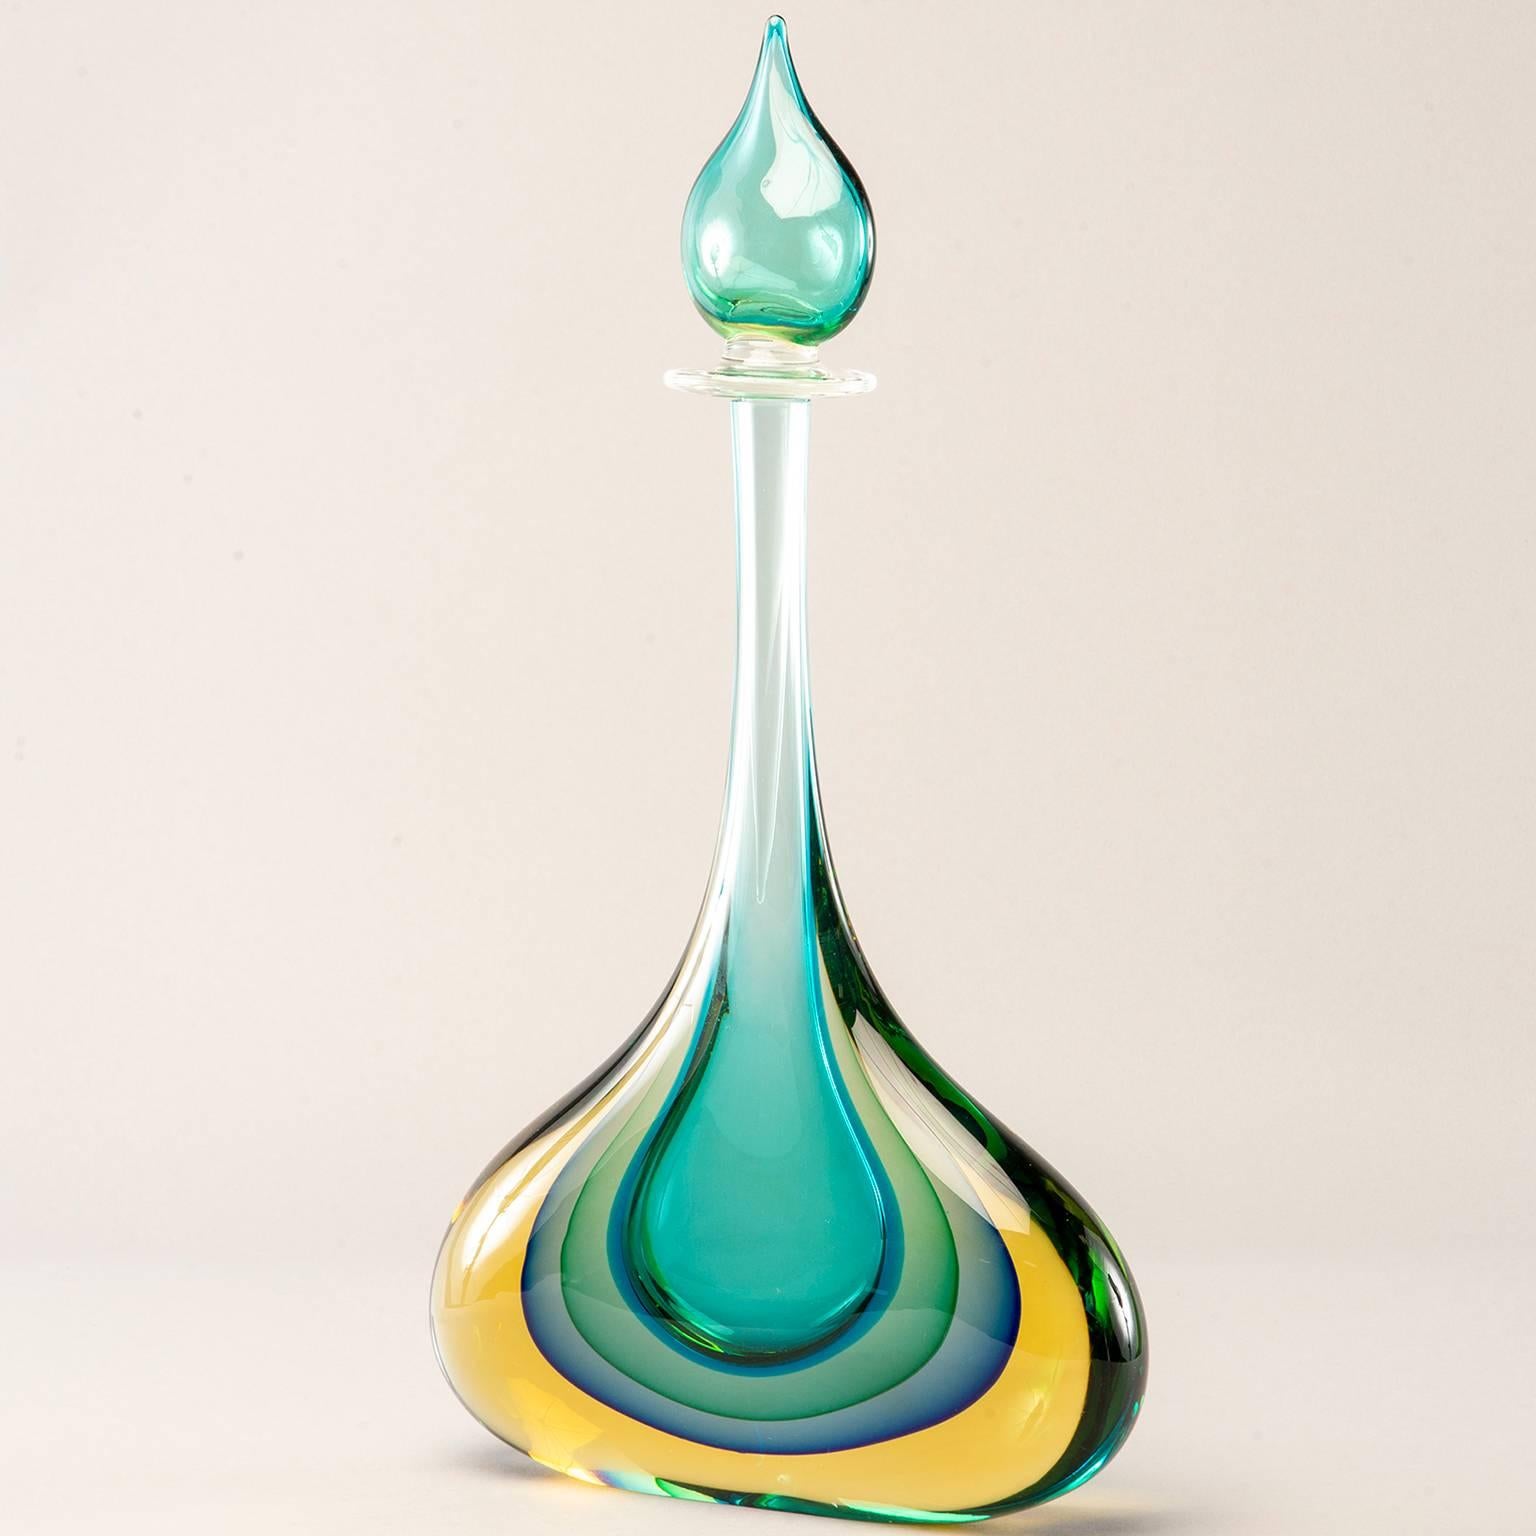 Italian Monumental Murano Glass Teal and Amber Sommerso Perfume Bottle with Stopper